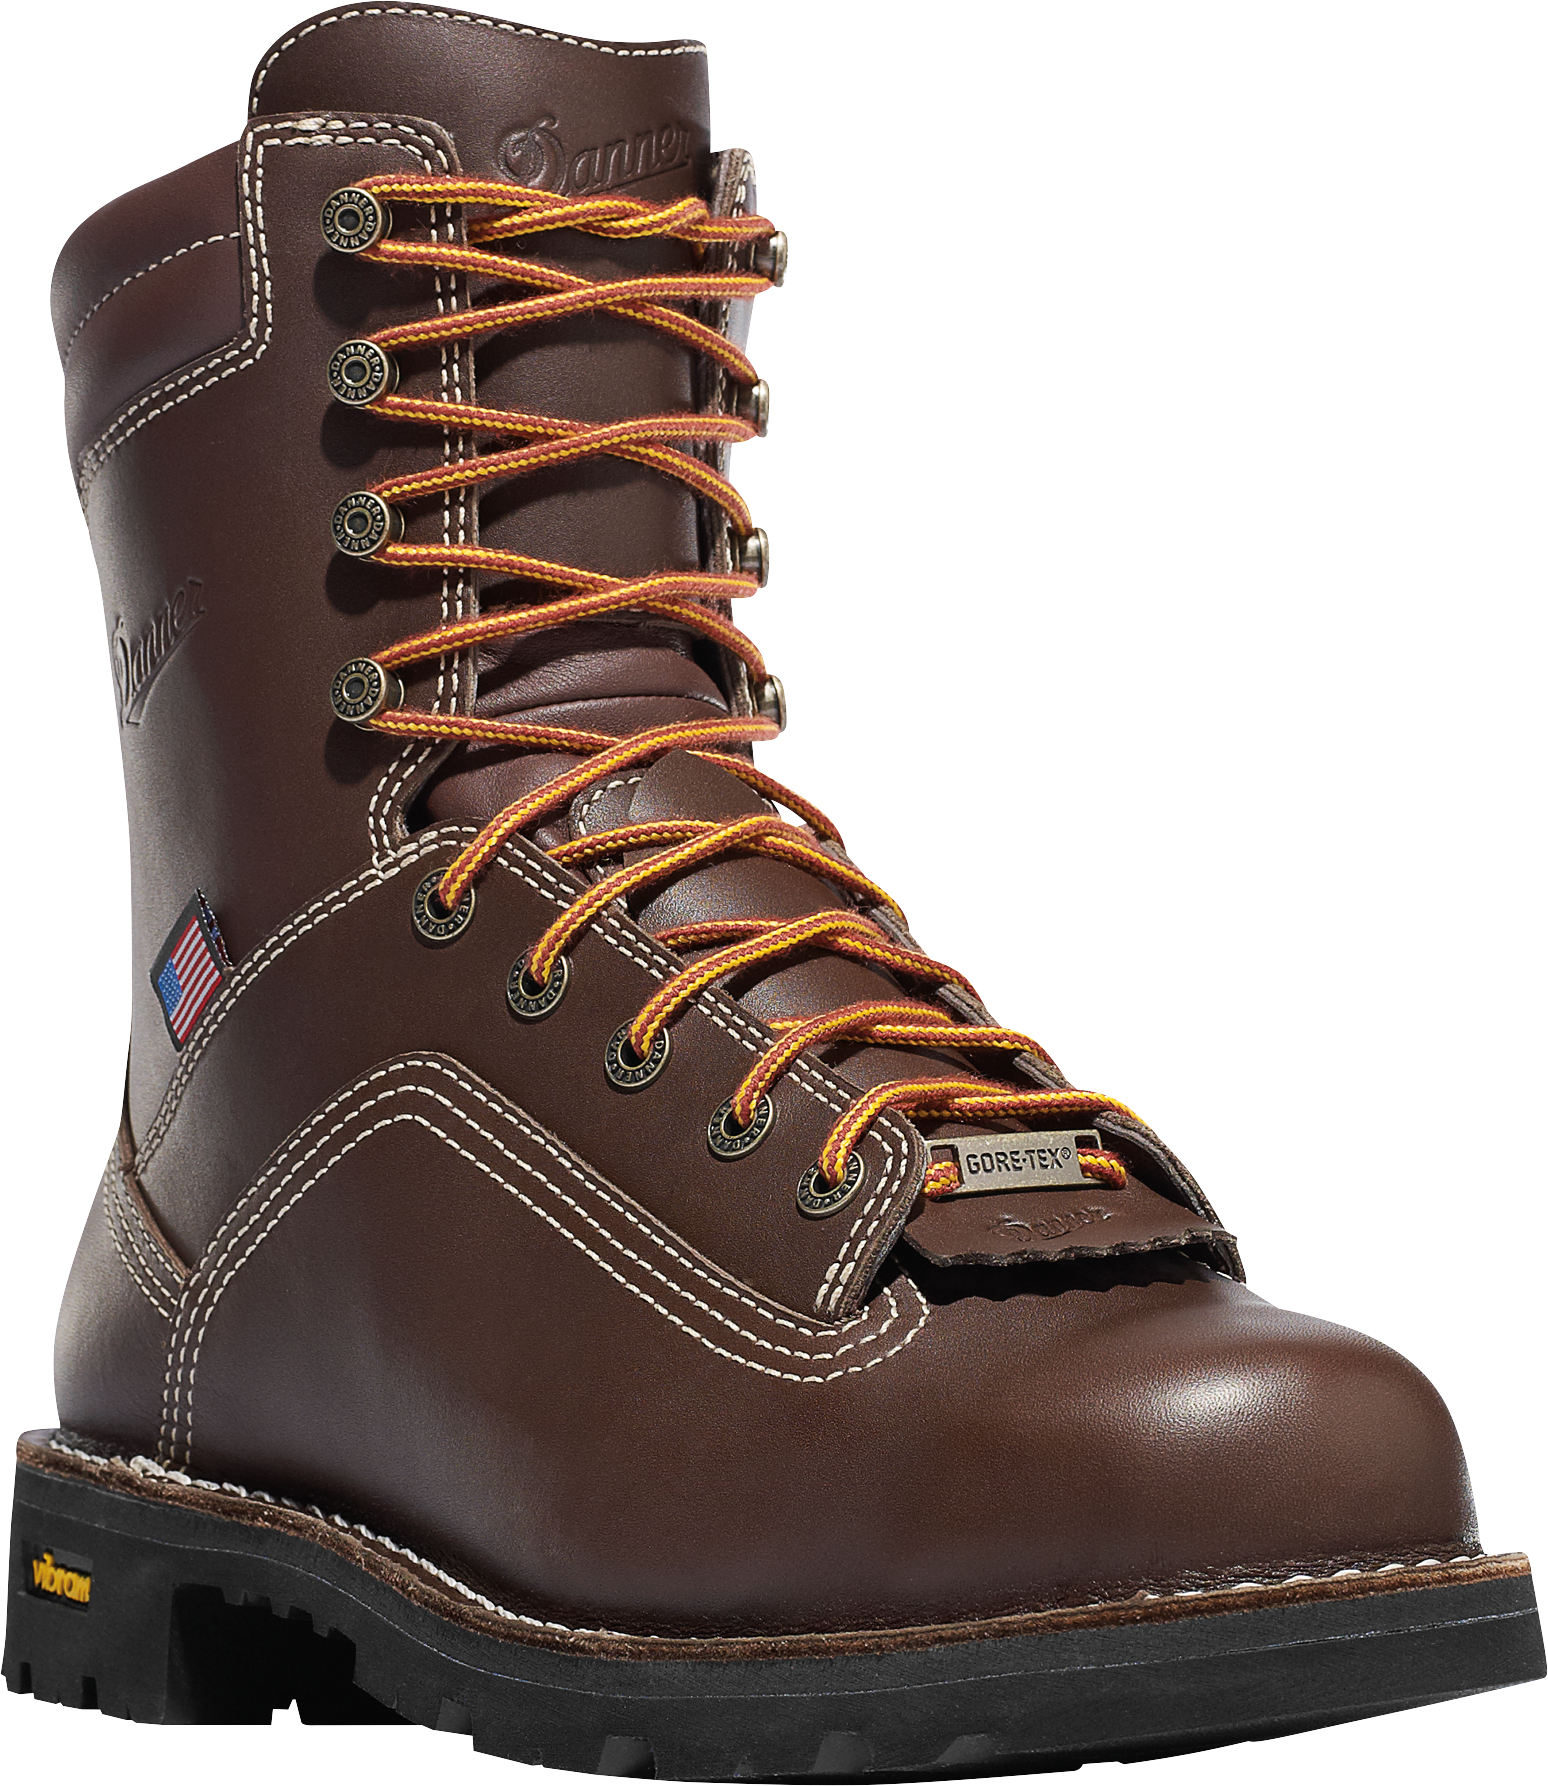 Danner Quarry USA Brown GORE-TEX Alloy Toe Work Boots for Men - Brown - 8.5M